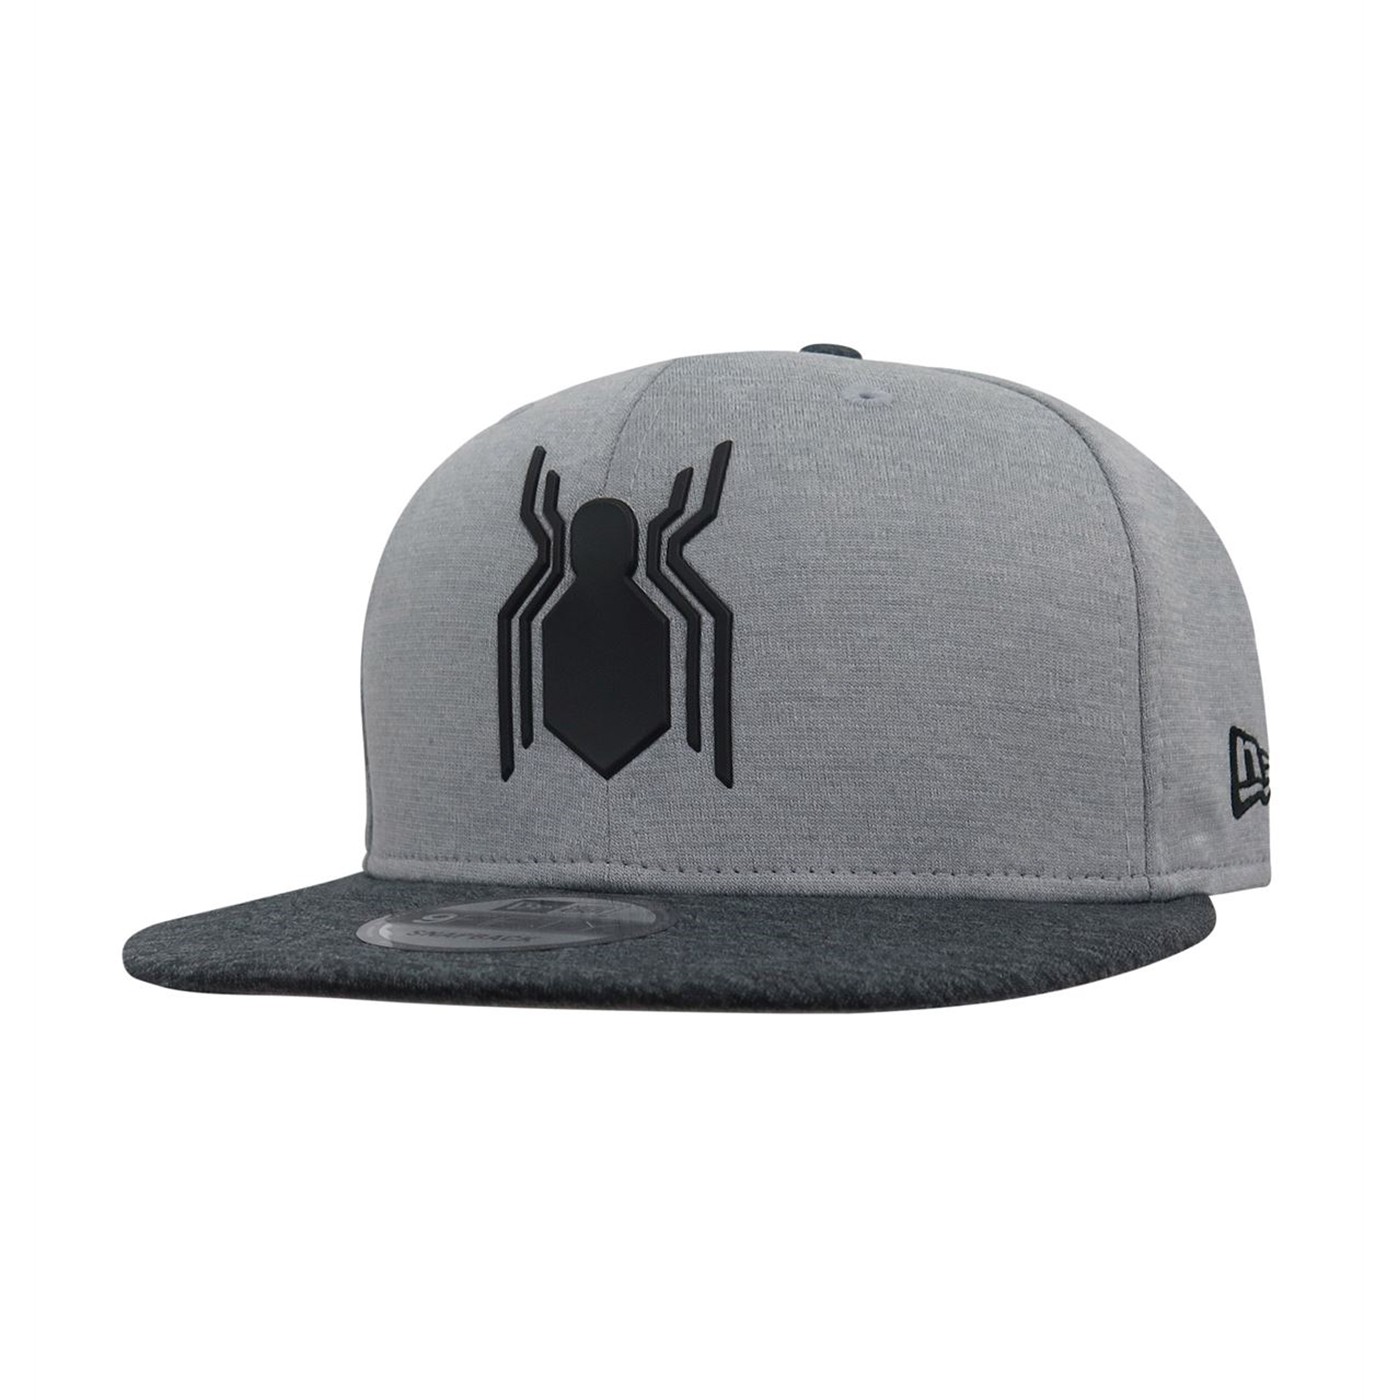 Spider-Man Homecoming Logo Gray 9Fifty Adjustable Hat